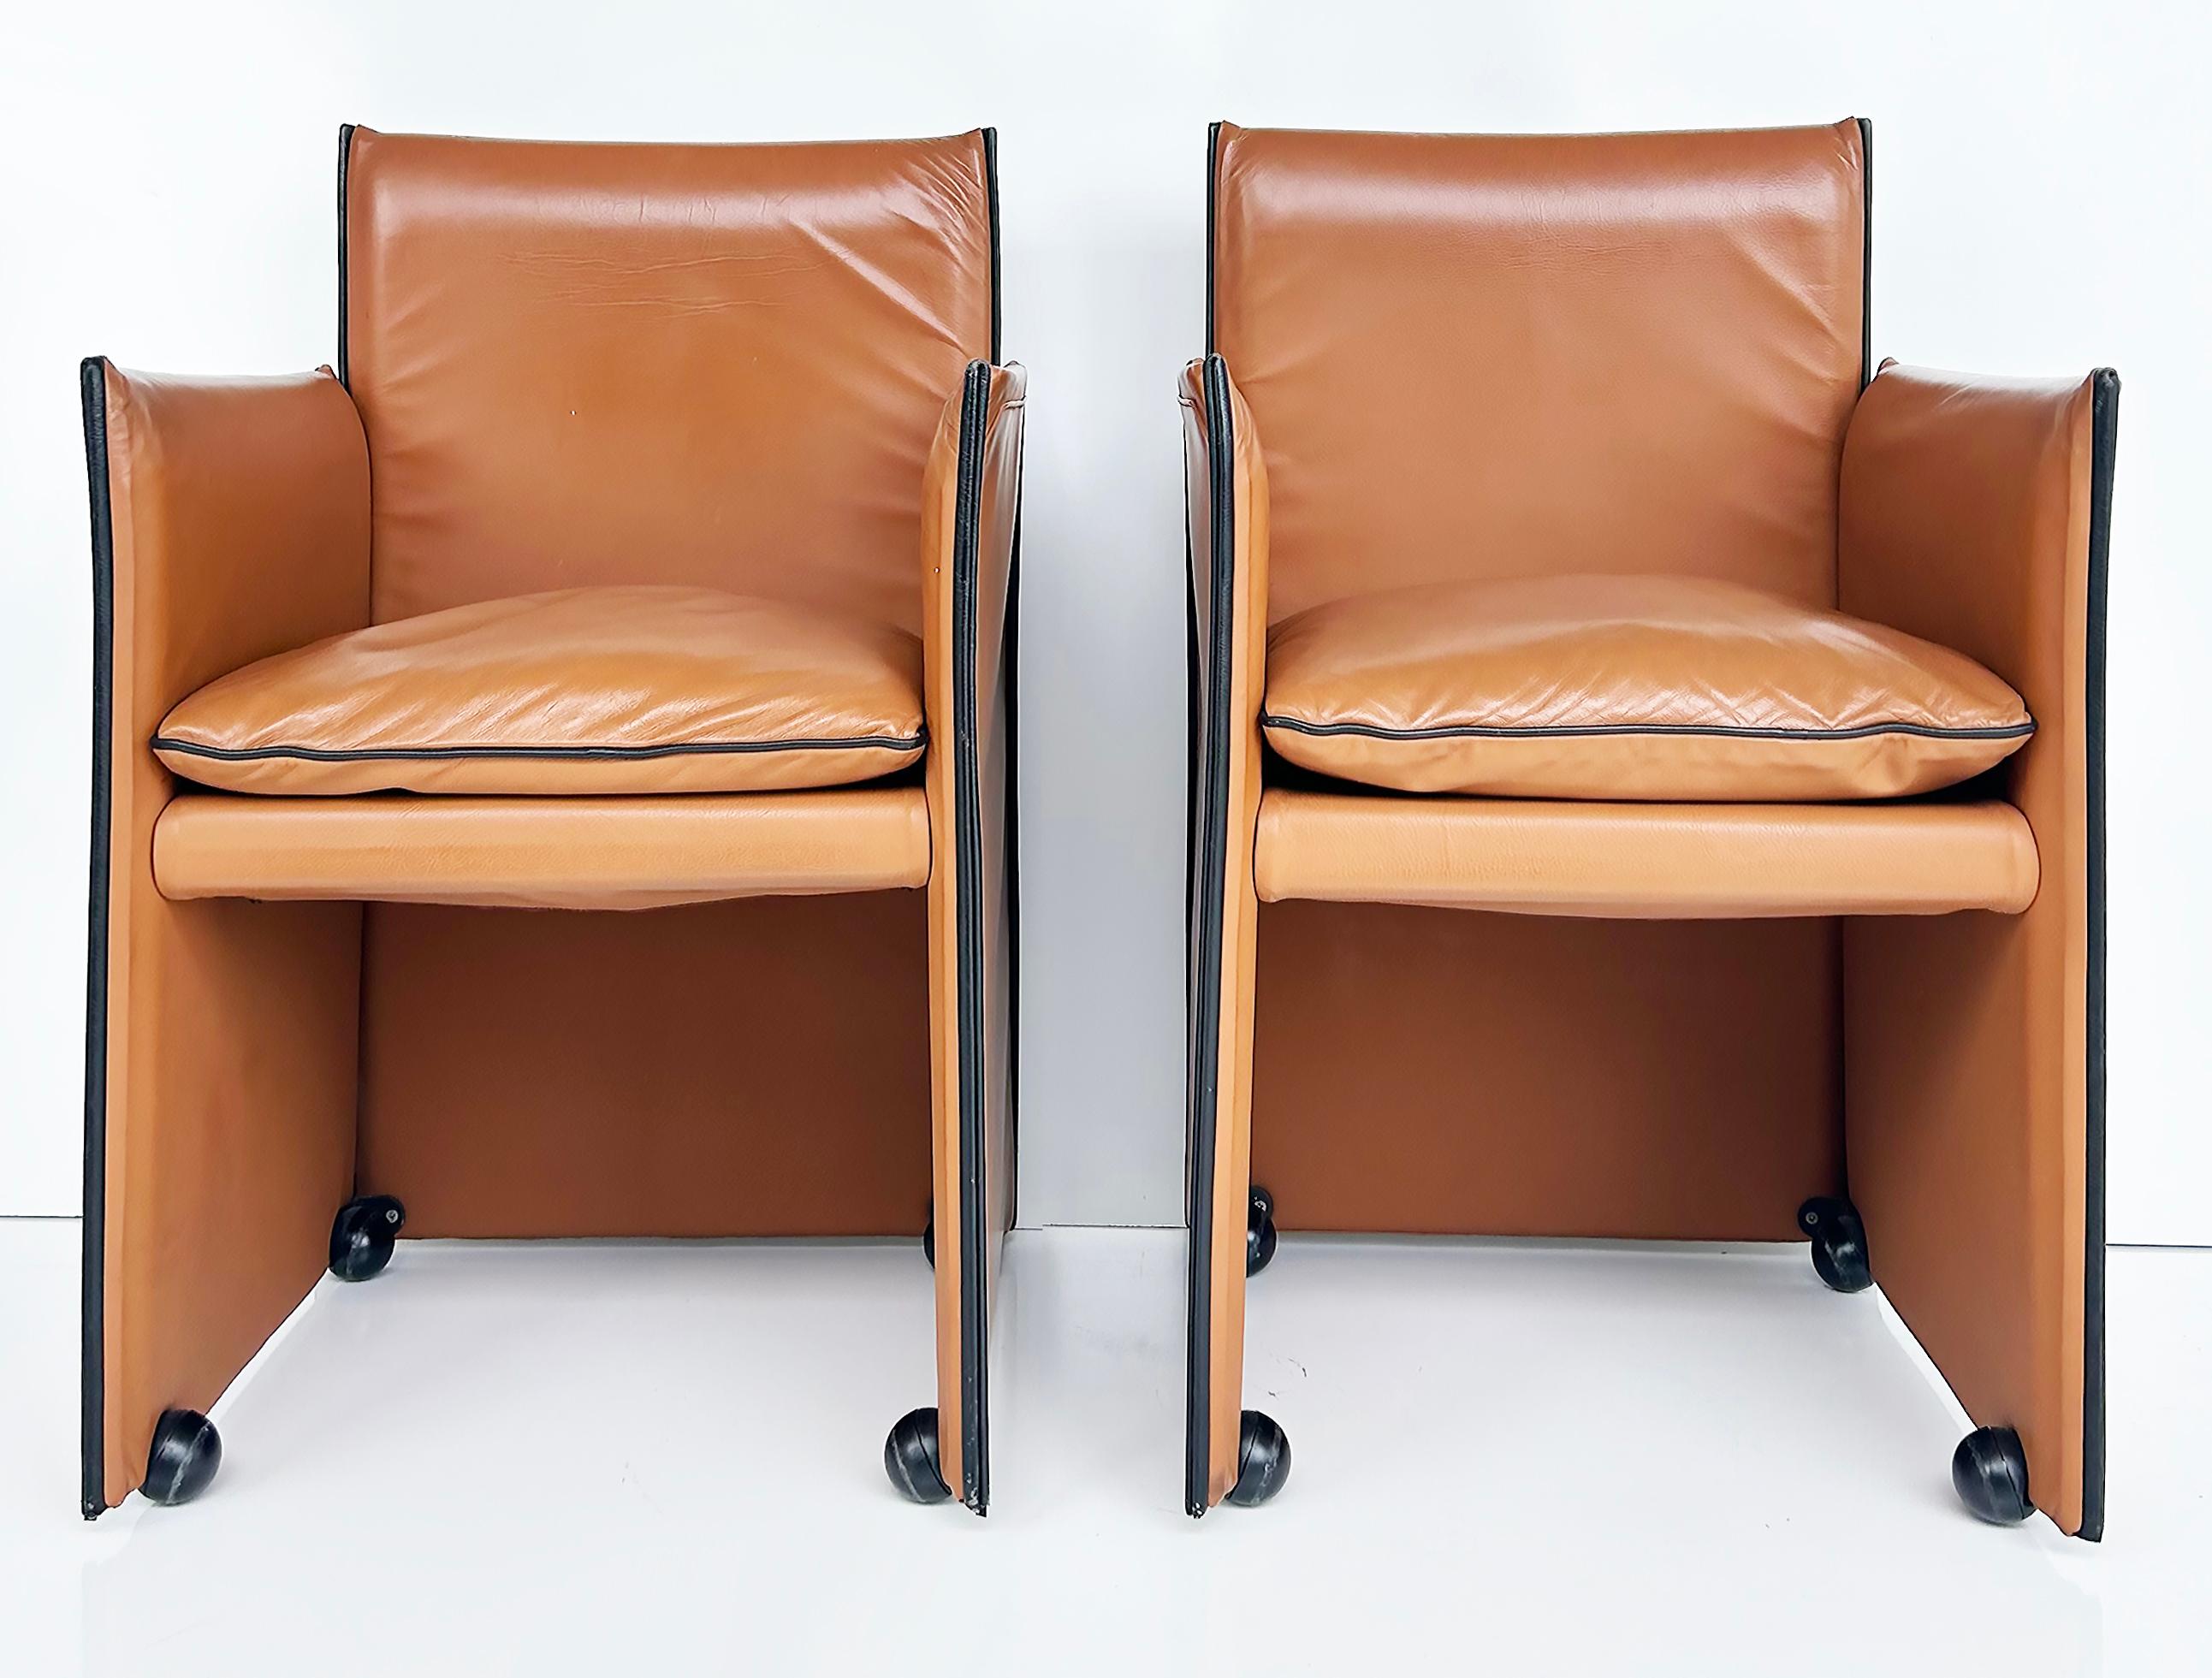 Mario Bellini Cassina Italian 401 Break Leather Armchairs, 1980s Pair

Offered for sale is a pair of iconic chairs designed by Mario Bellini for Cassina in the 1980s.  The 